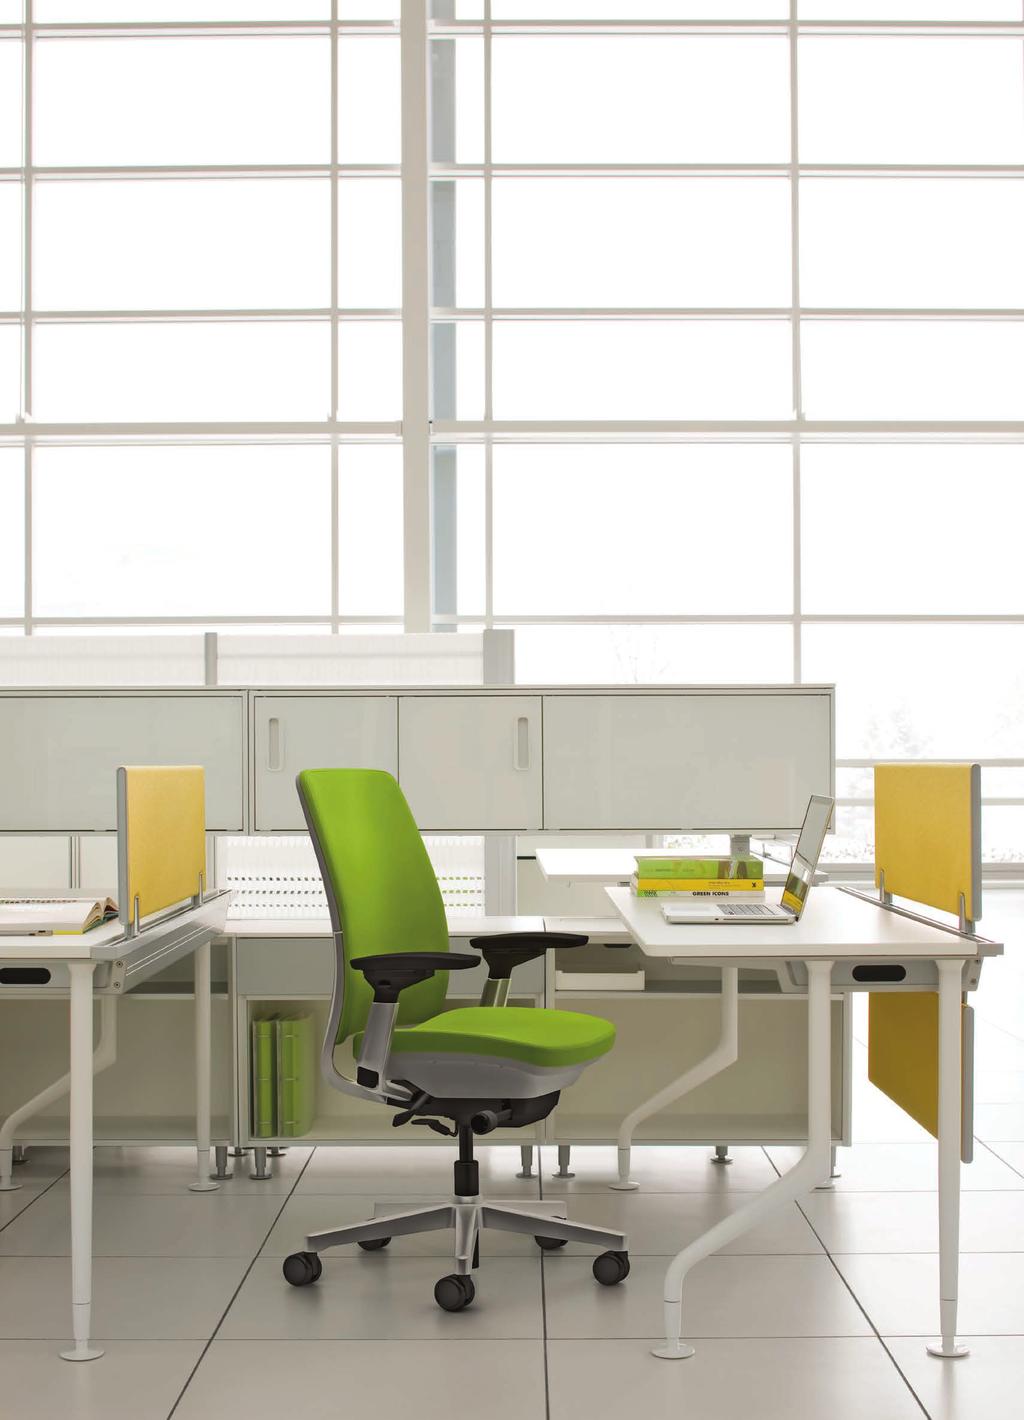 FURNITURE SYSTEMS 1 2 3 1 c:scape A solution designed to support people and the work they do.